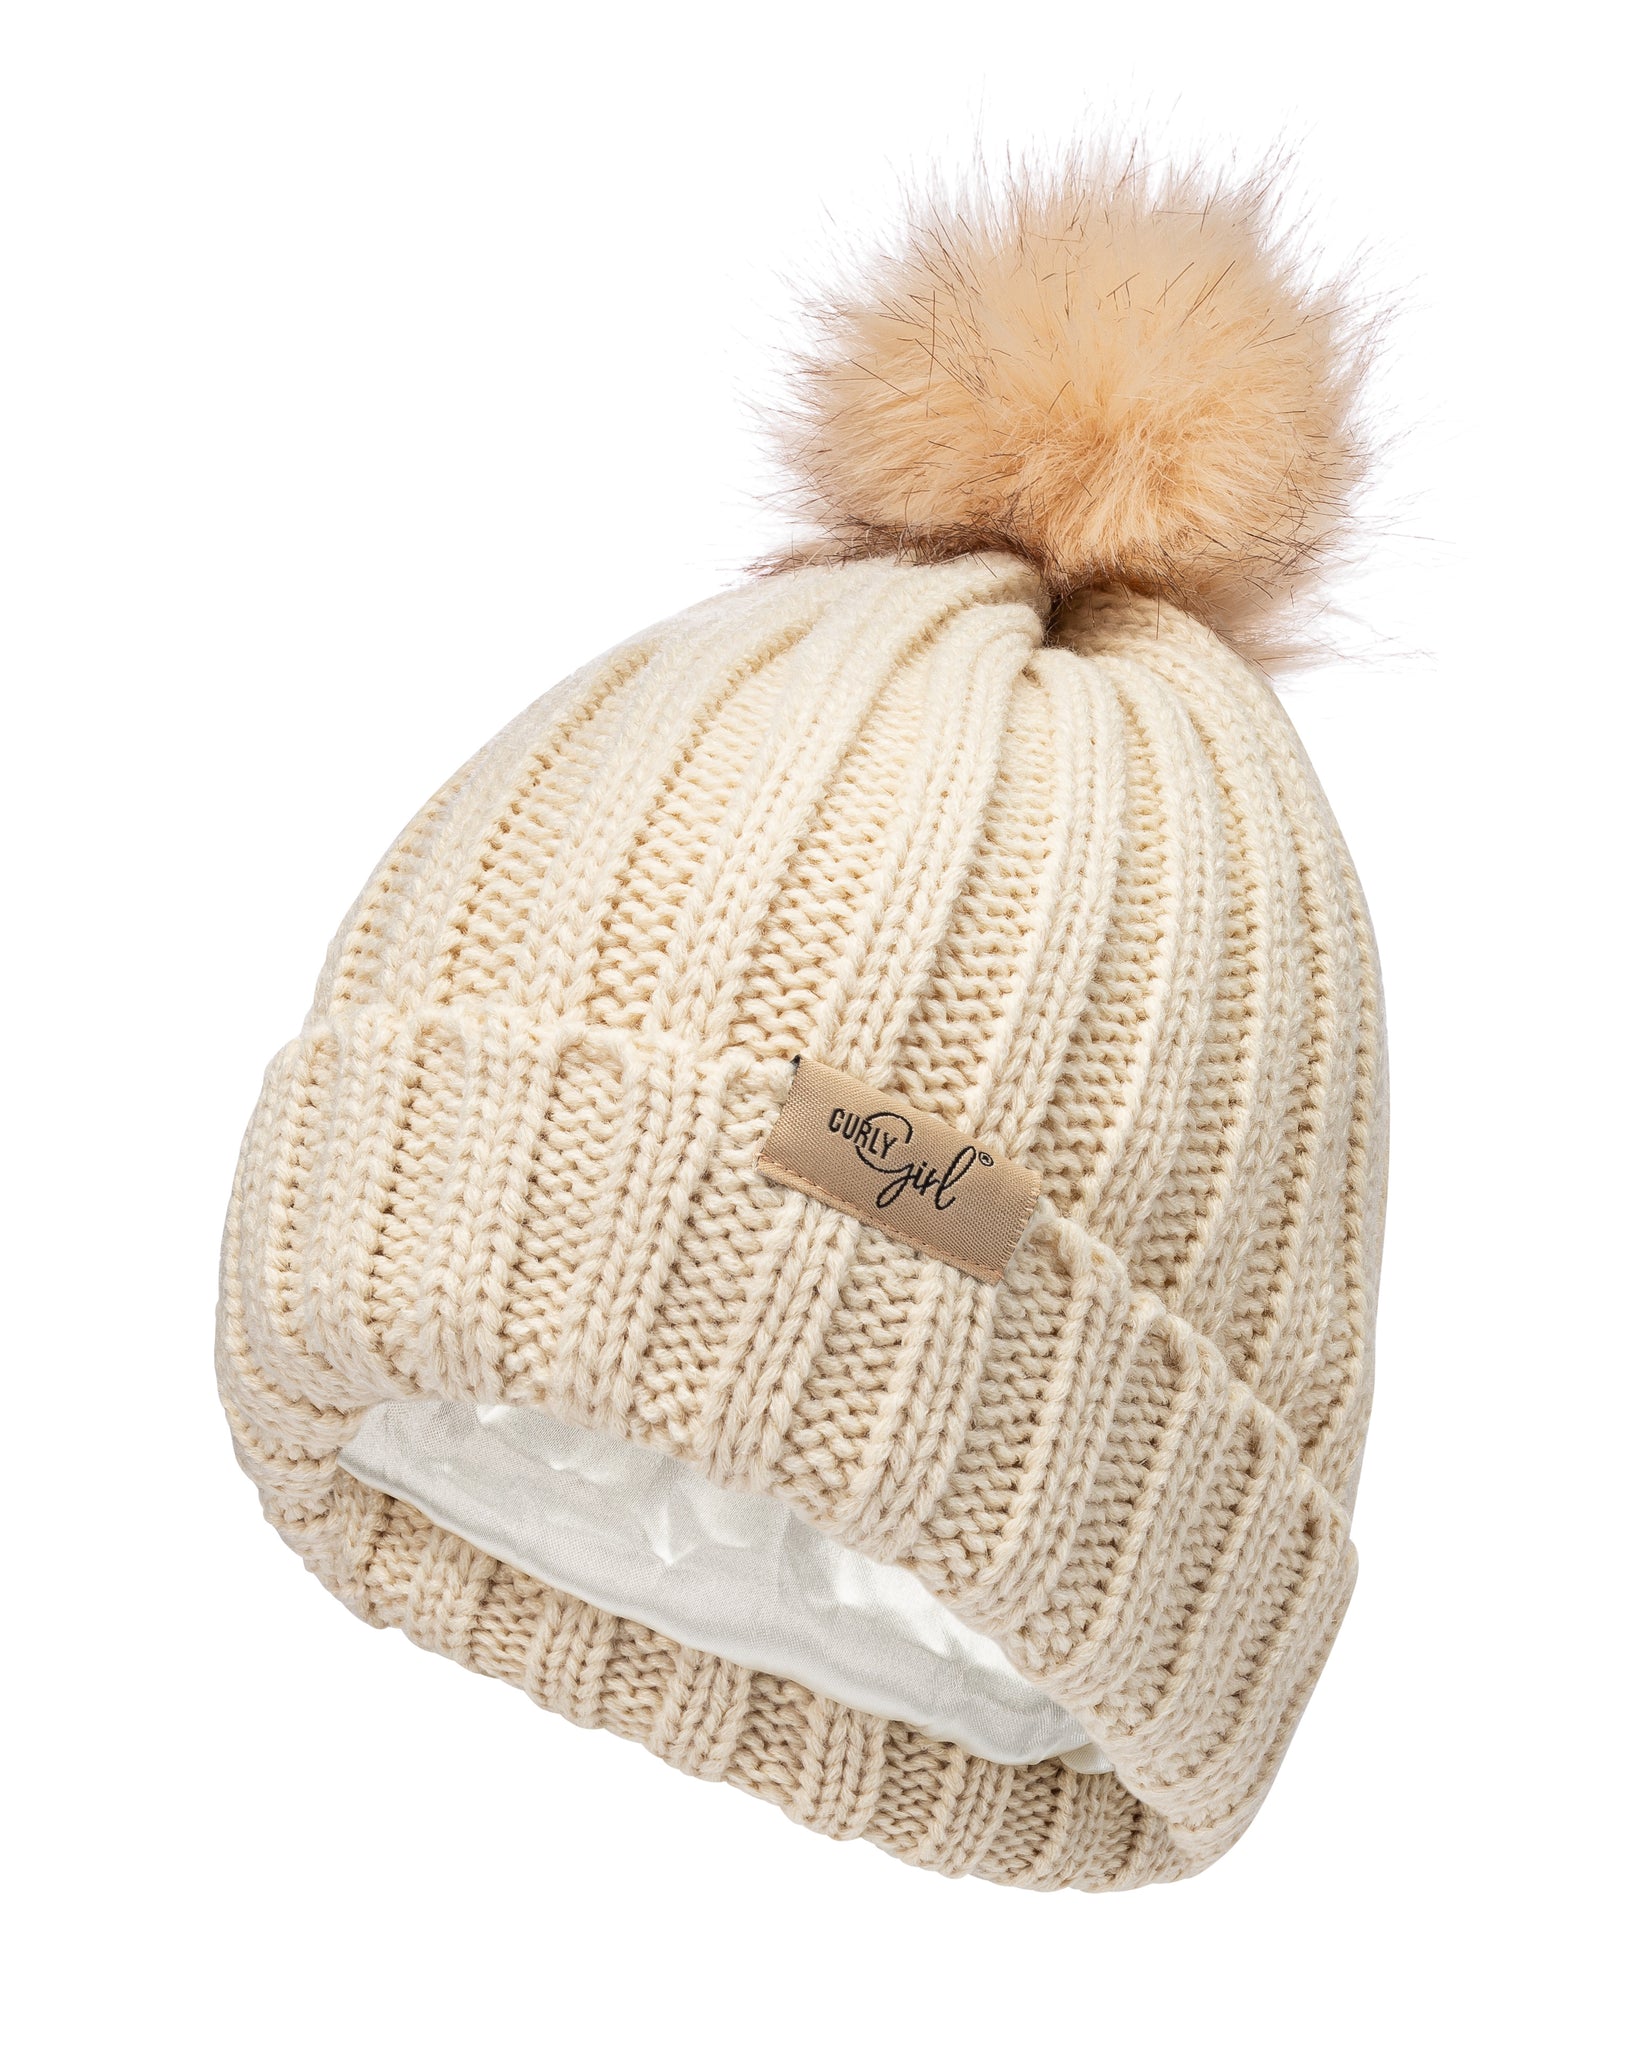 Curly Girl Womens Winter Knitted Beanie Hat with Faux Fur Pom Warm